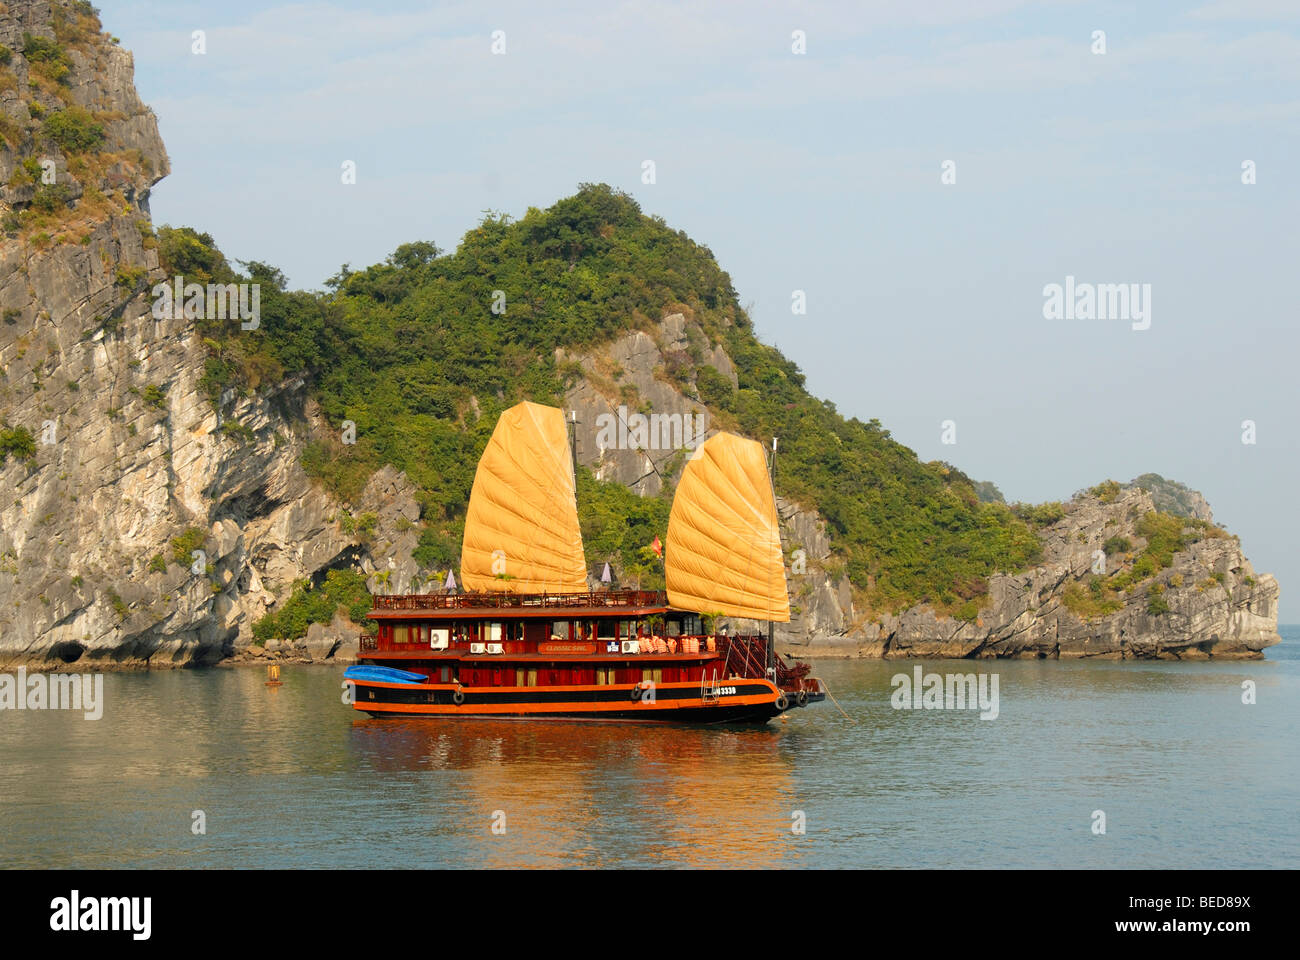 Typical sailing ship, Junk, with two yellow sails in front of a rocky island, Ha Long Bay, Vietnam, Asia Stock Photo